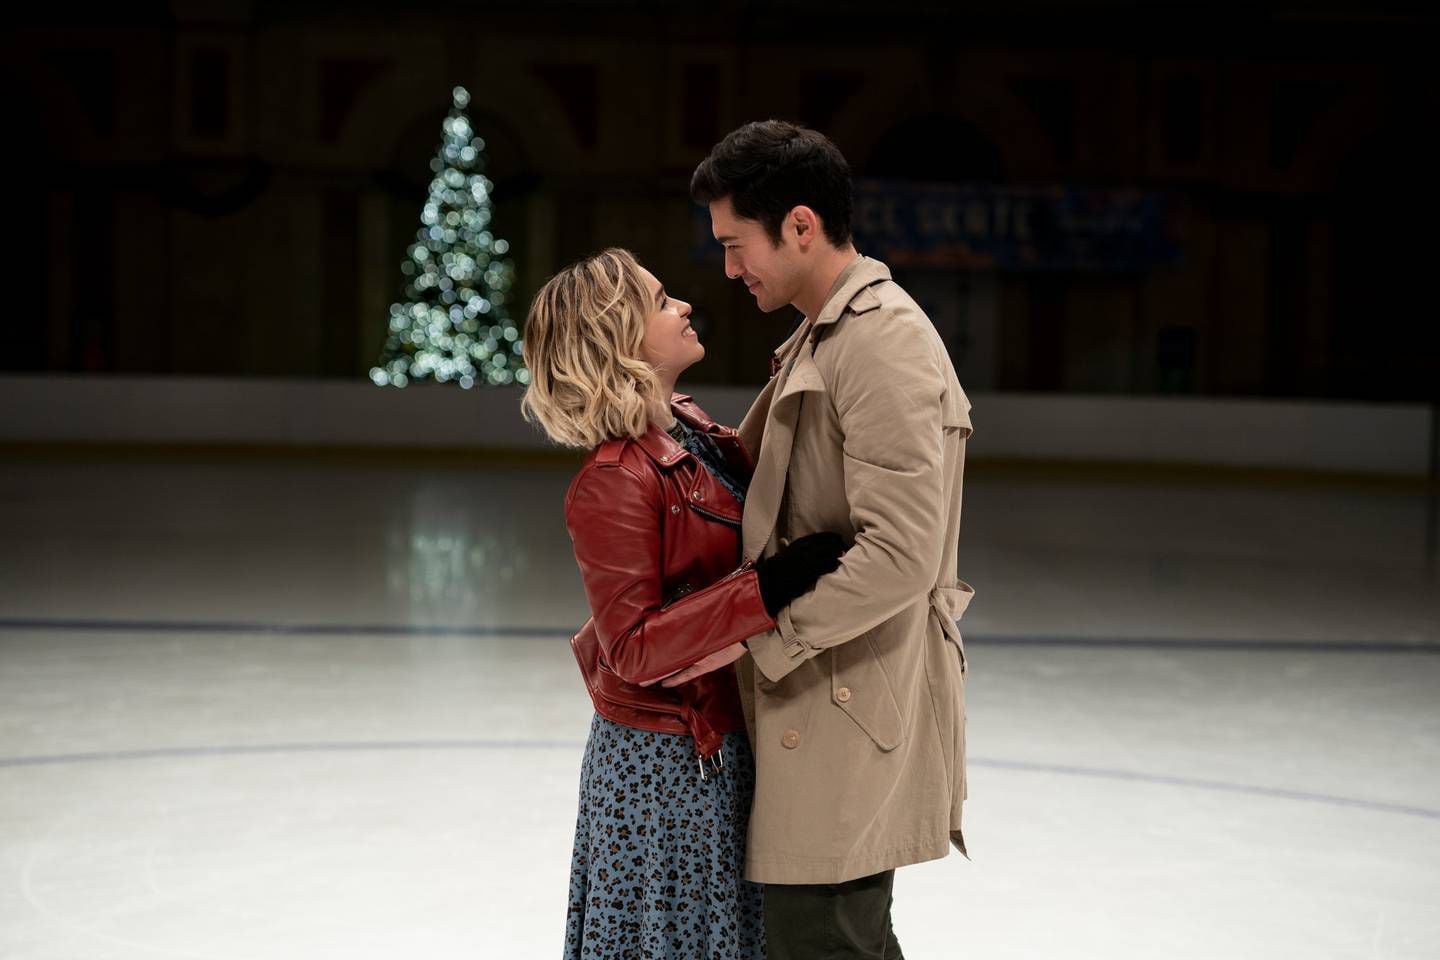 From Love Actually to Hallmark movies: how rom-coms became a Christmas  staple - NZ Herald